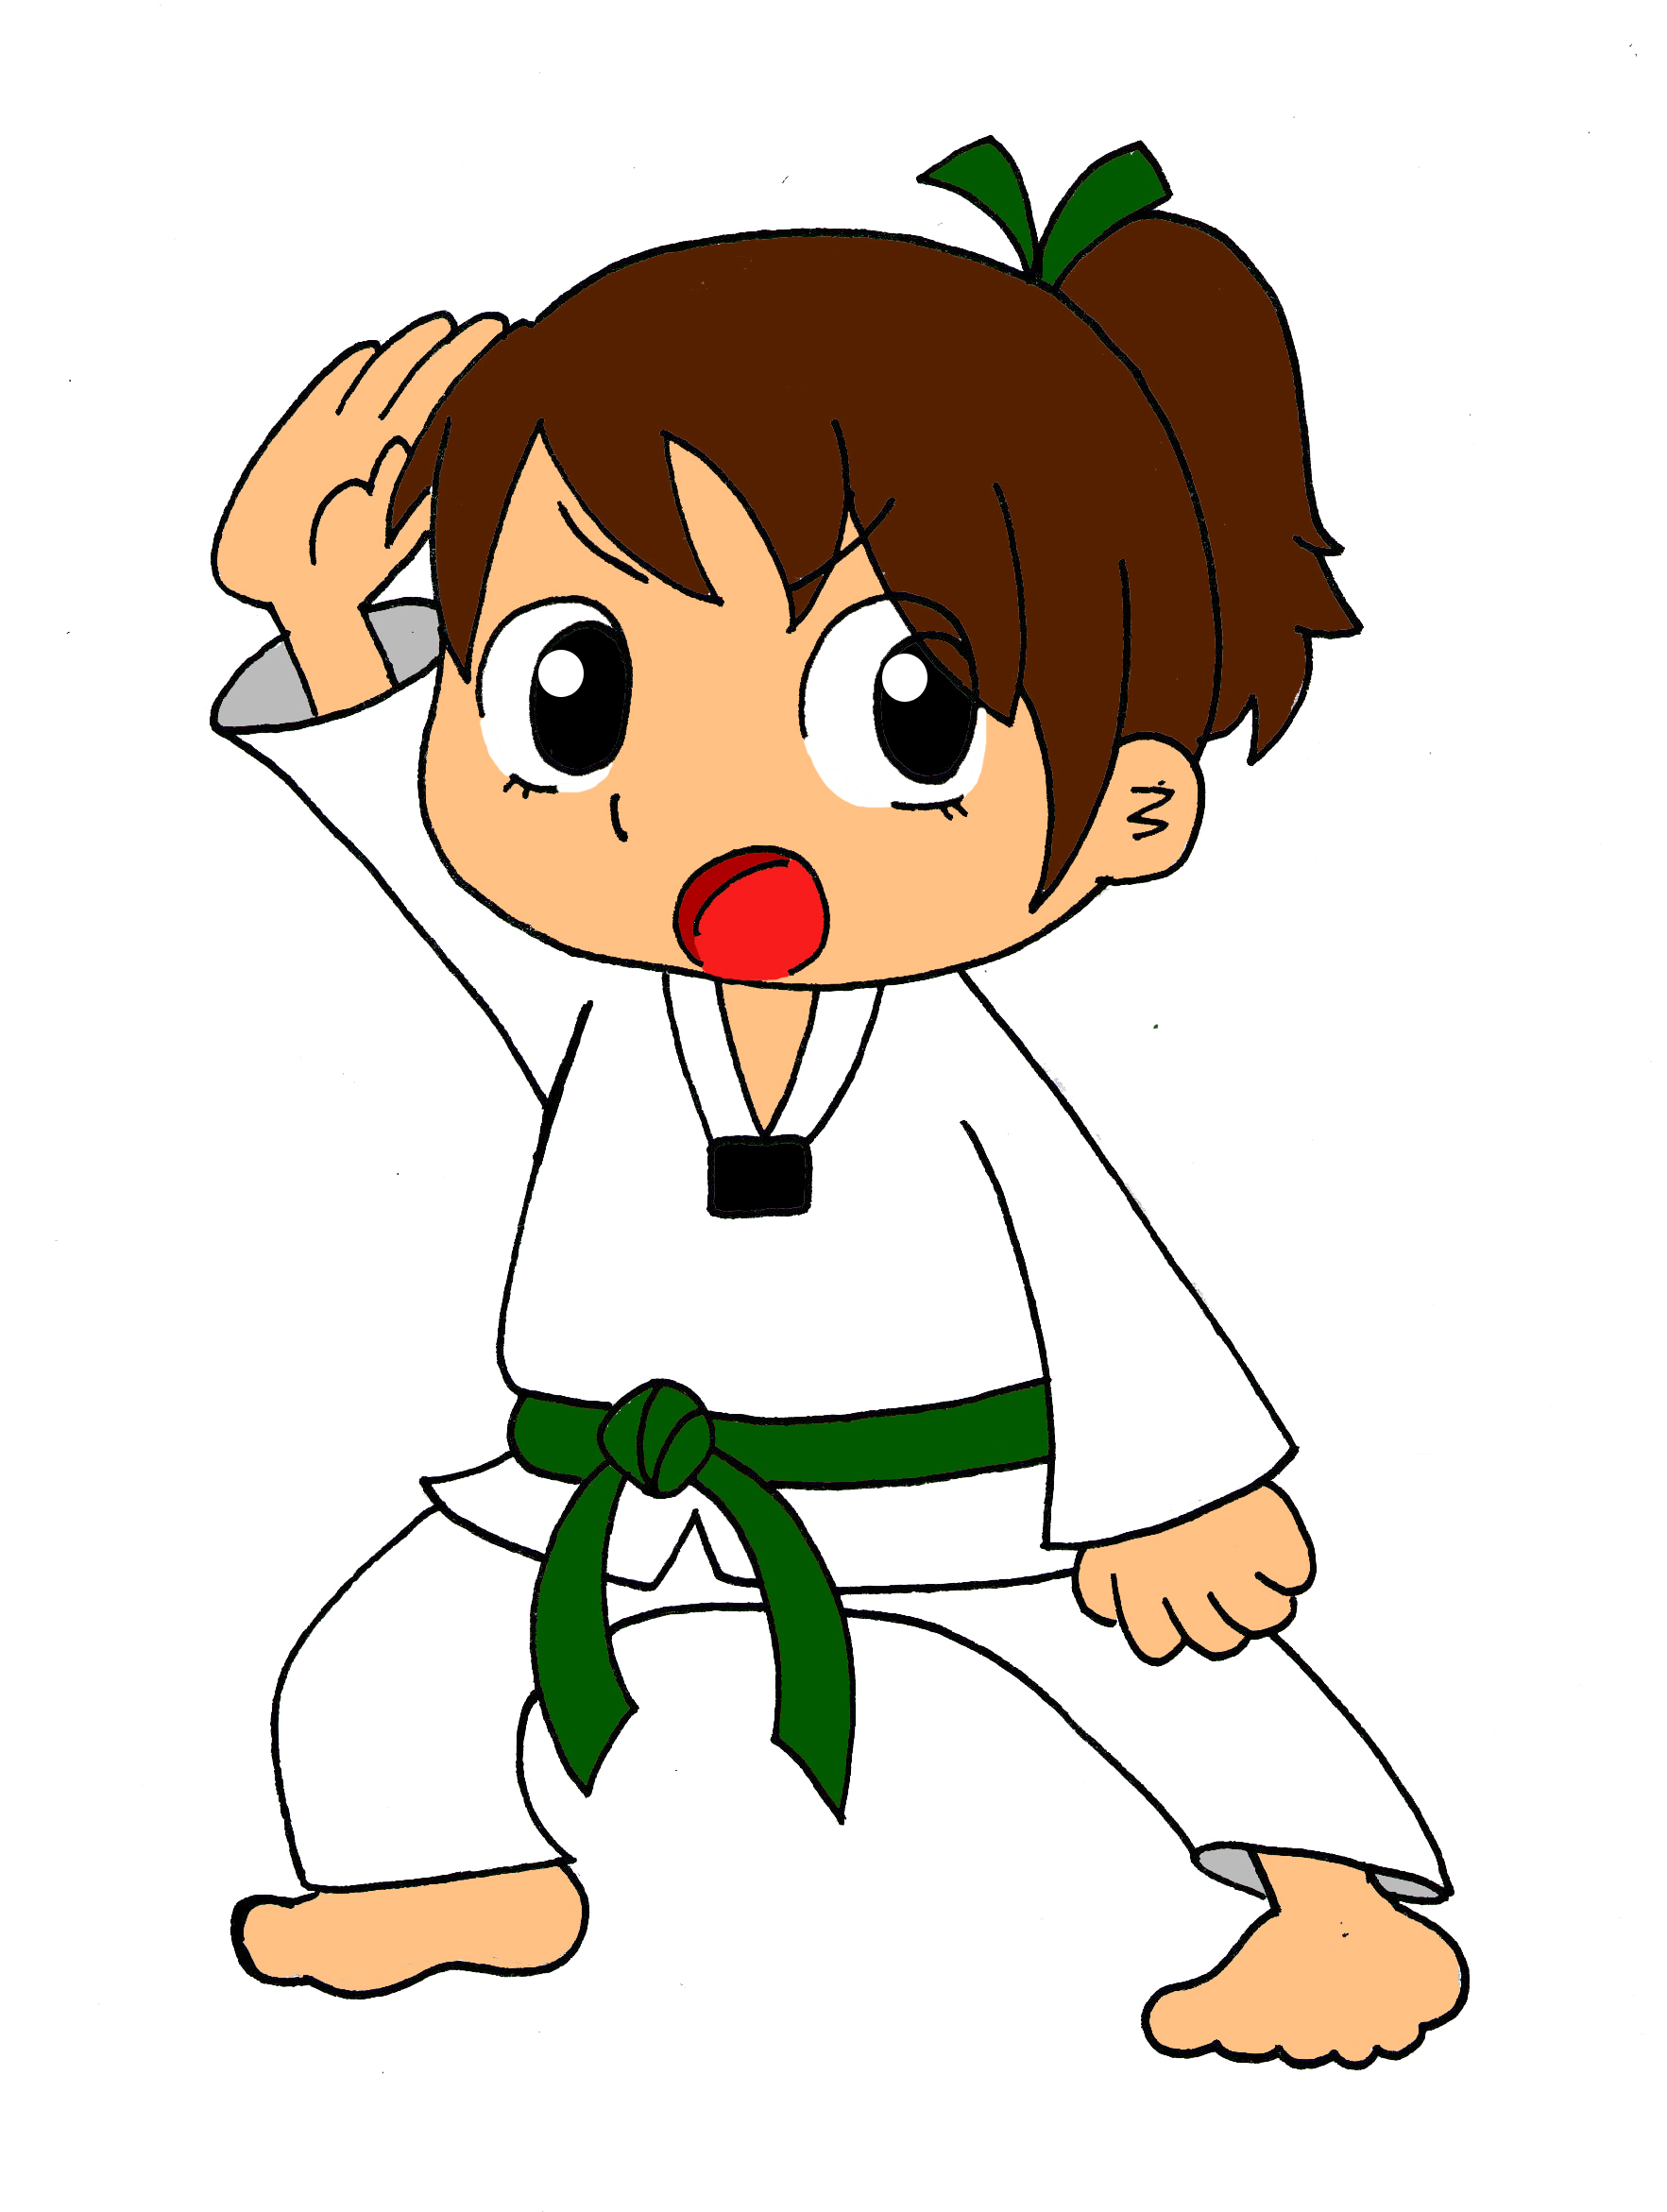 Karate gallery for tkd image clip art graphic